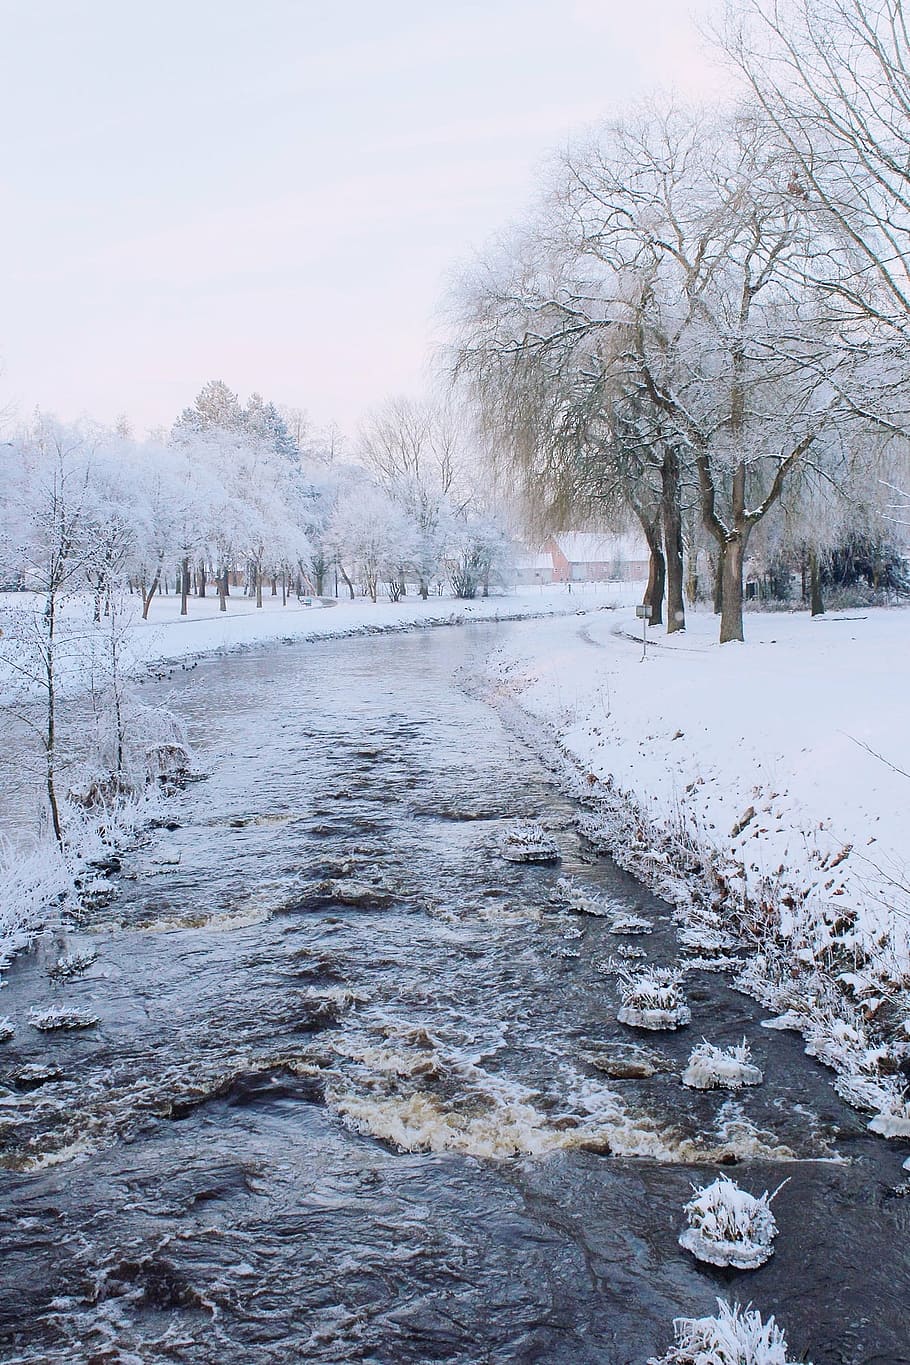 snowy, road, surrounded, trees, river, wintry, winter, landscape, snow, winter magic